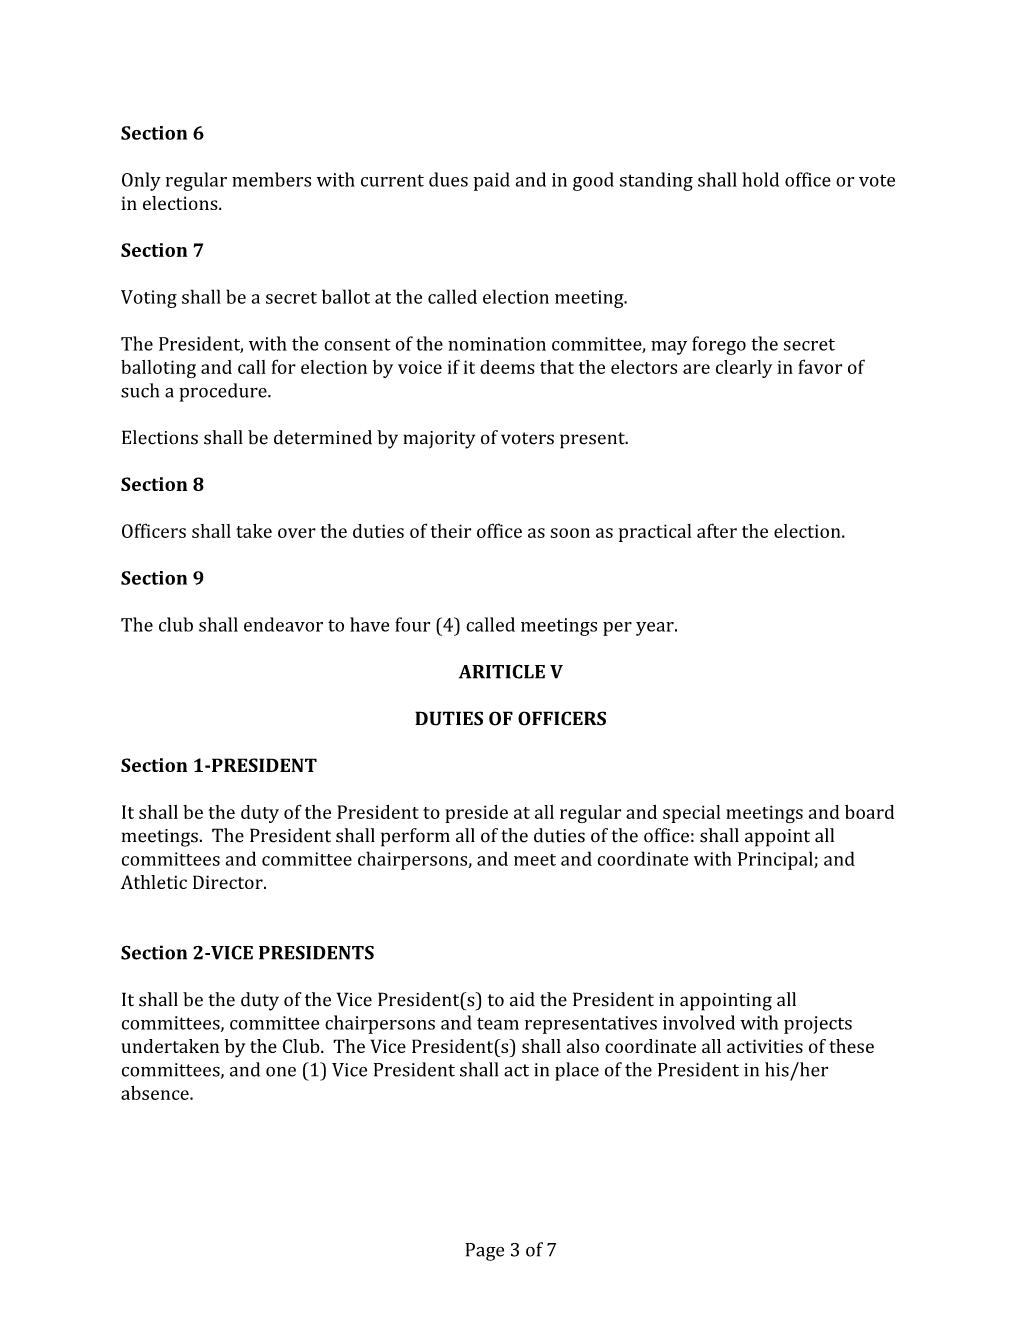 Bylaws for the Golden Hawks Club, Inc